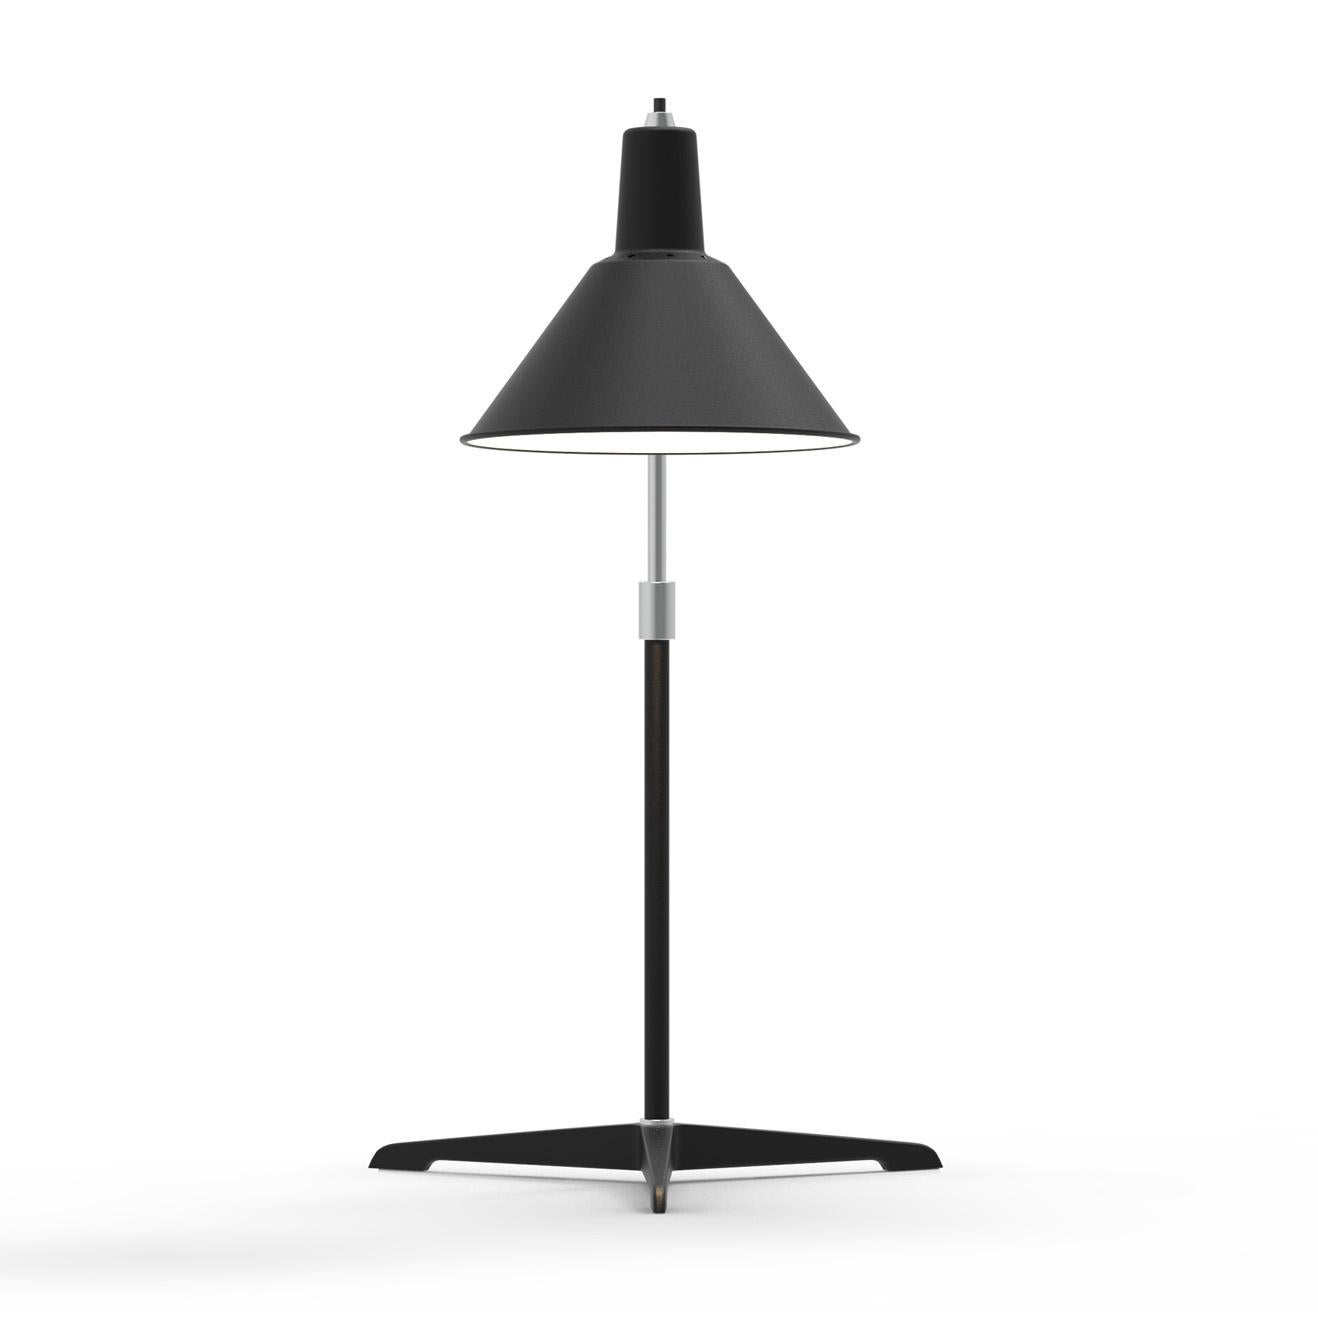 Arcon lamp series is an architectural conversion between function and proportion. The aim for the arcon table lamp was to create a clean functional table lamp still able to adjust with a few touches. It operates with a push button for on and off and